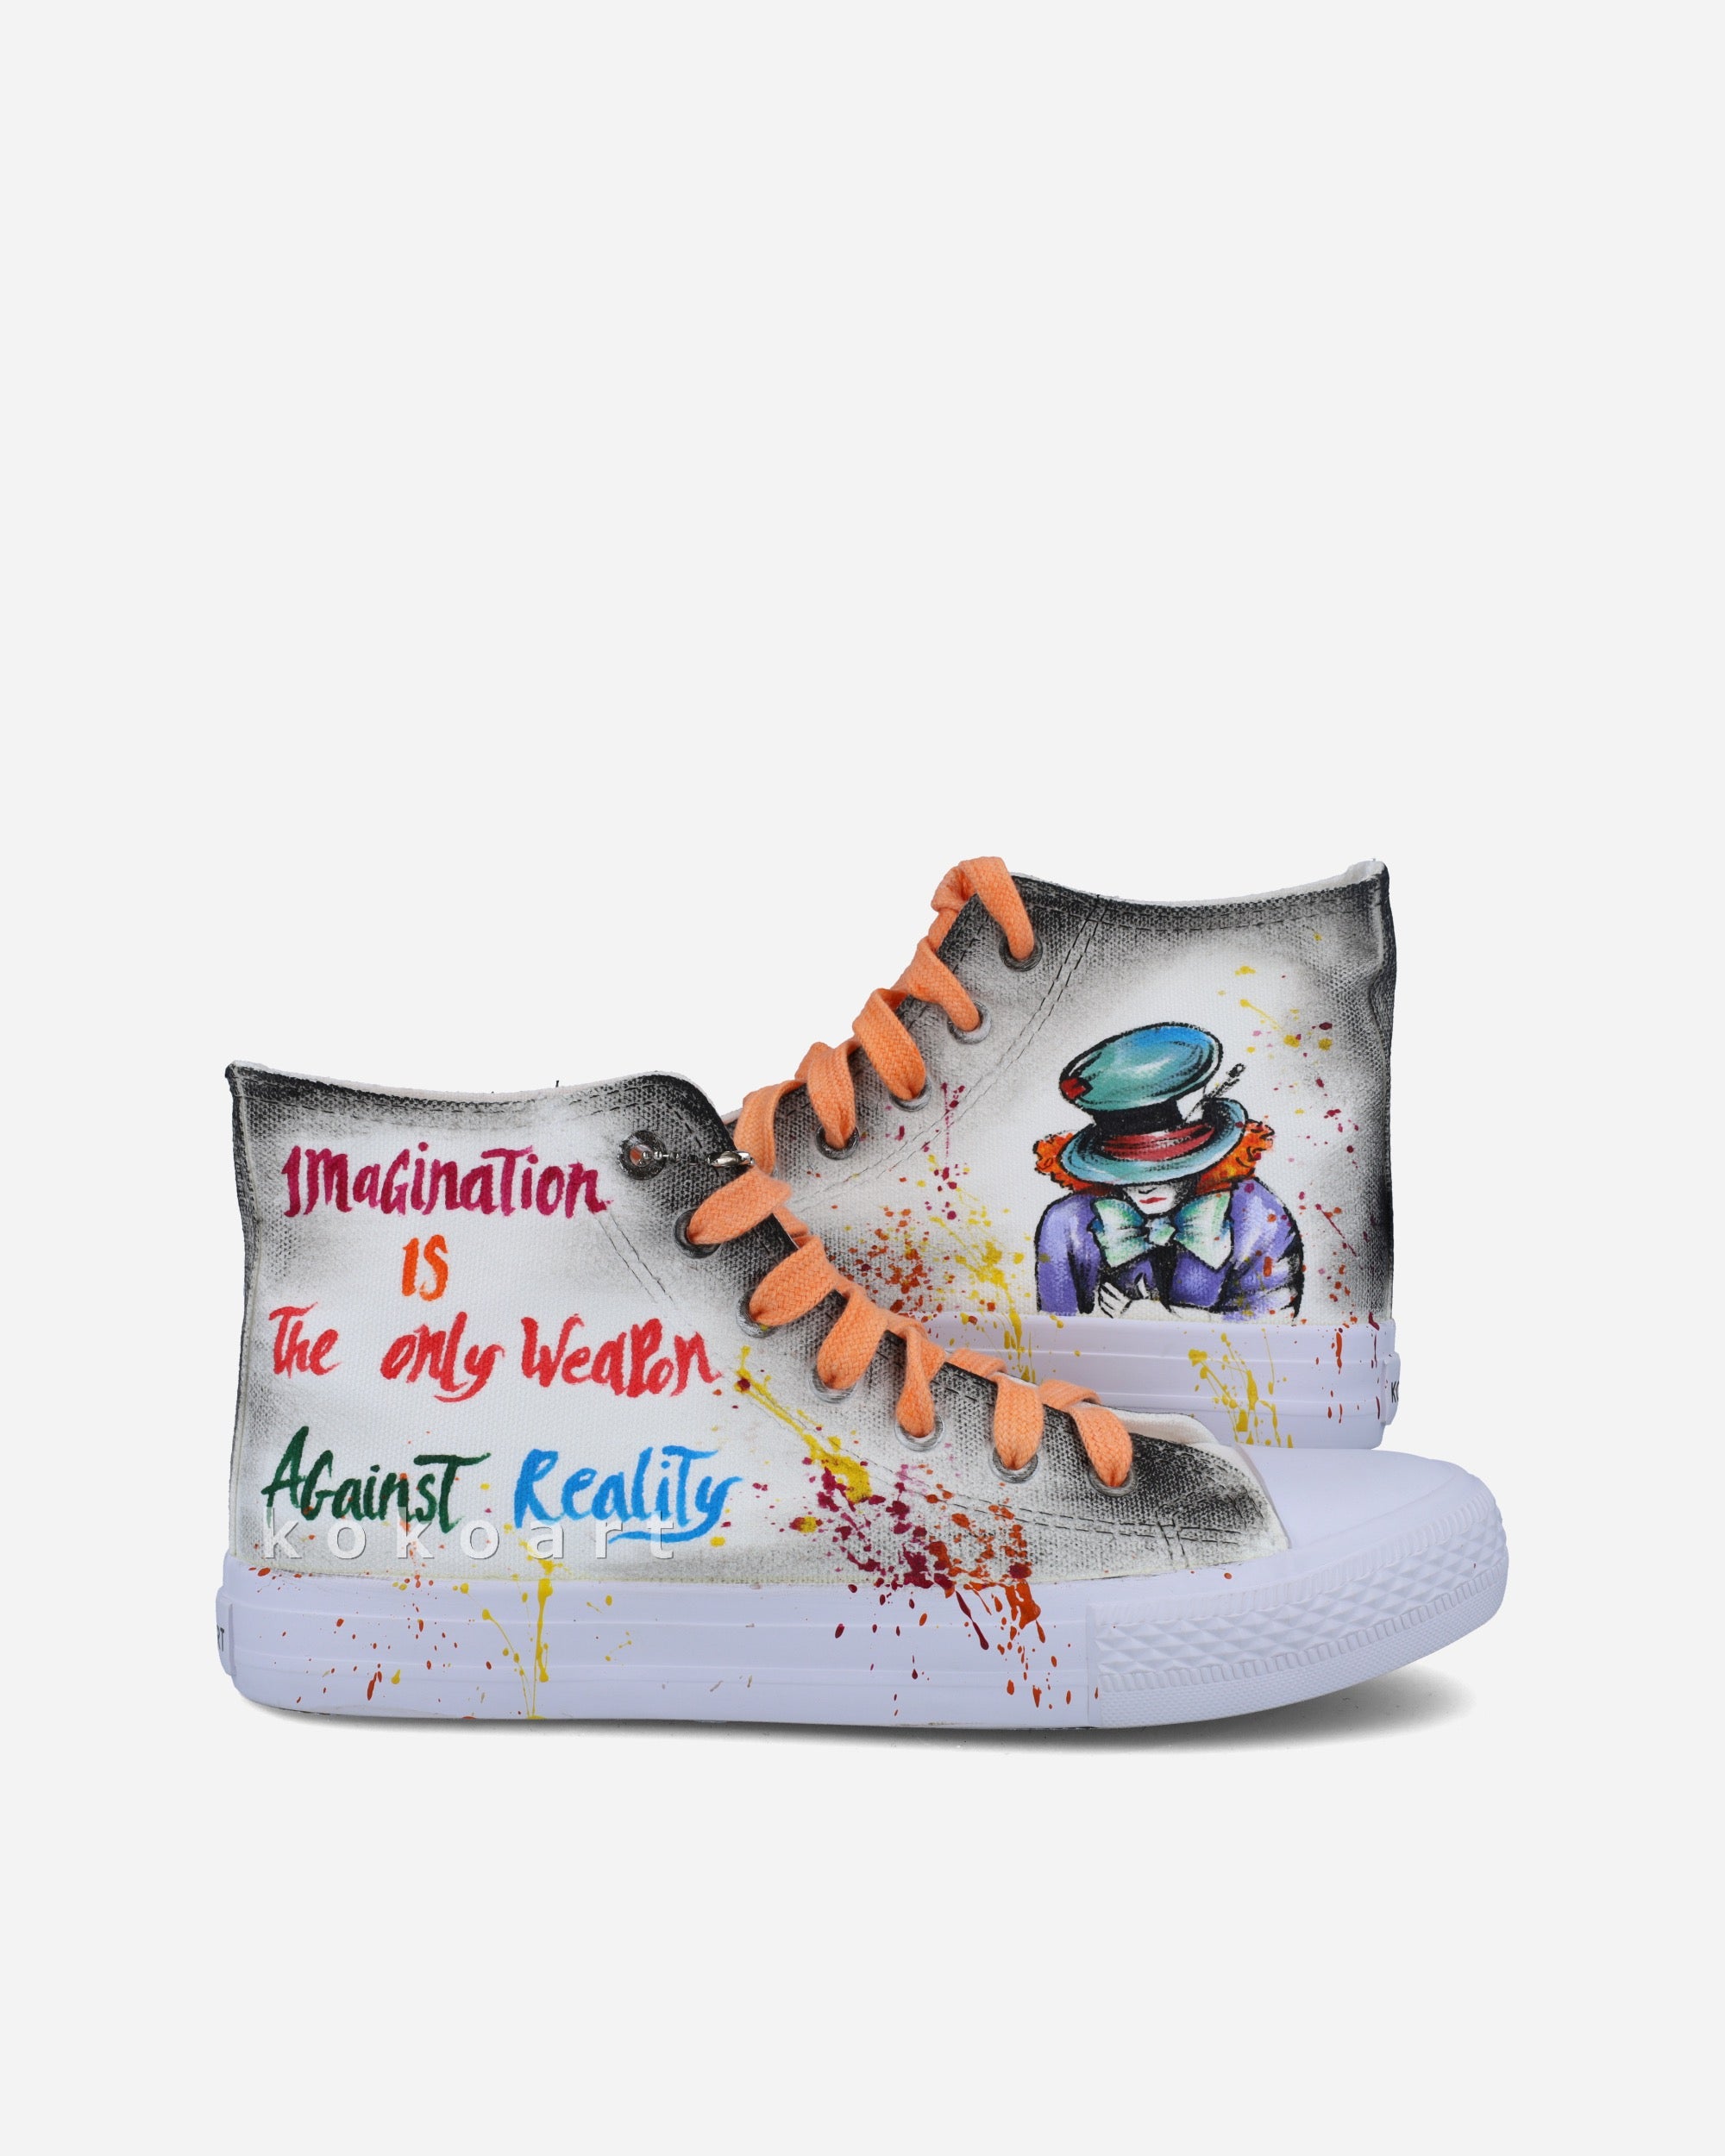 Mad Hatter Hand Painted Shoes